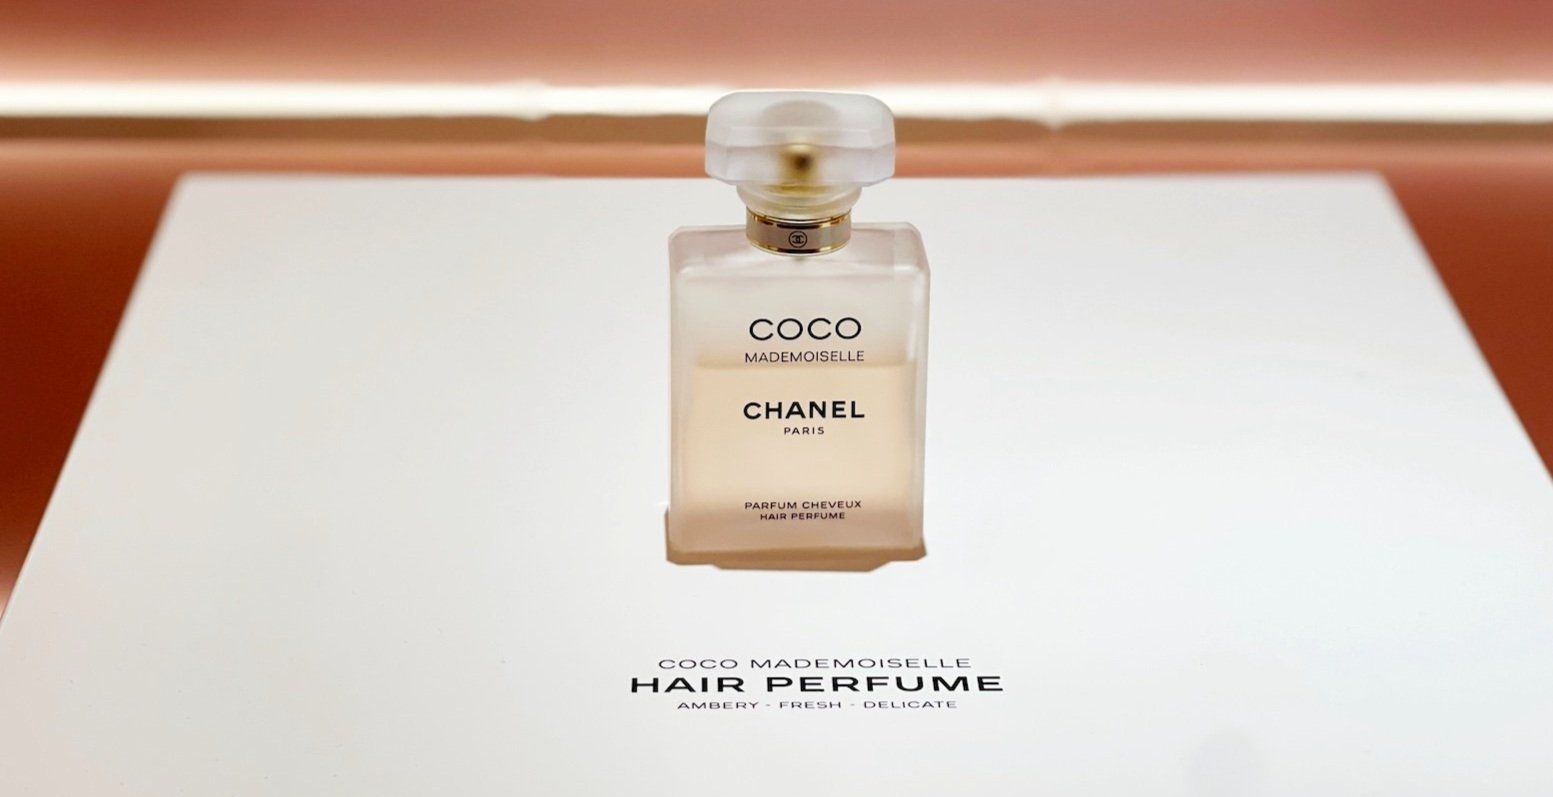 Whitney Peak Makes History As The New Face Of Chanel Coco